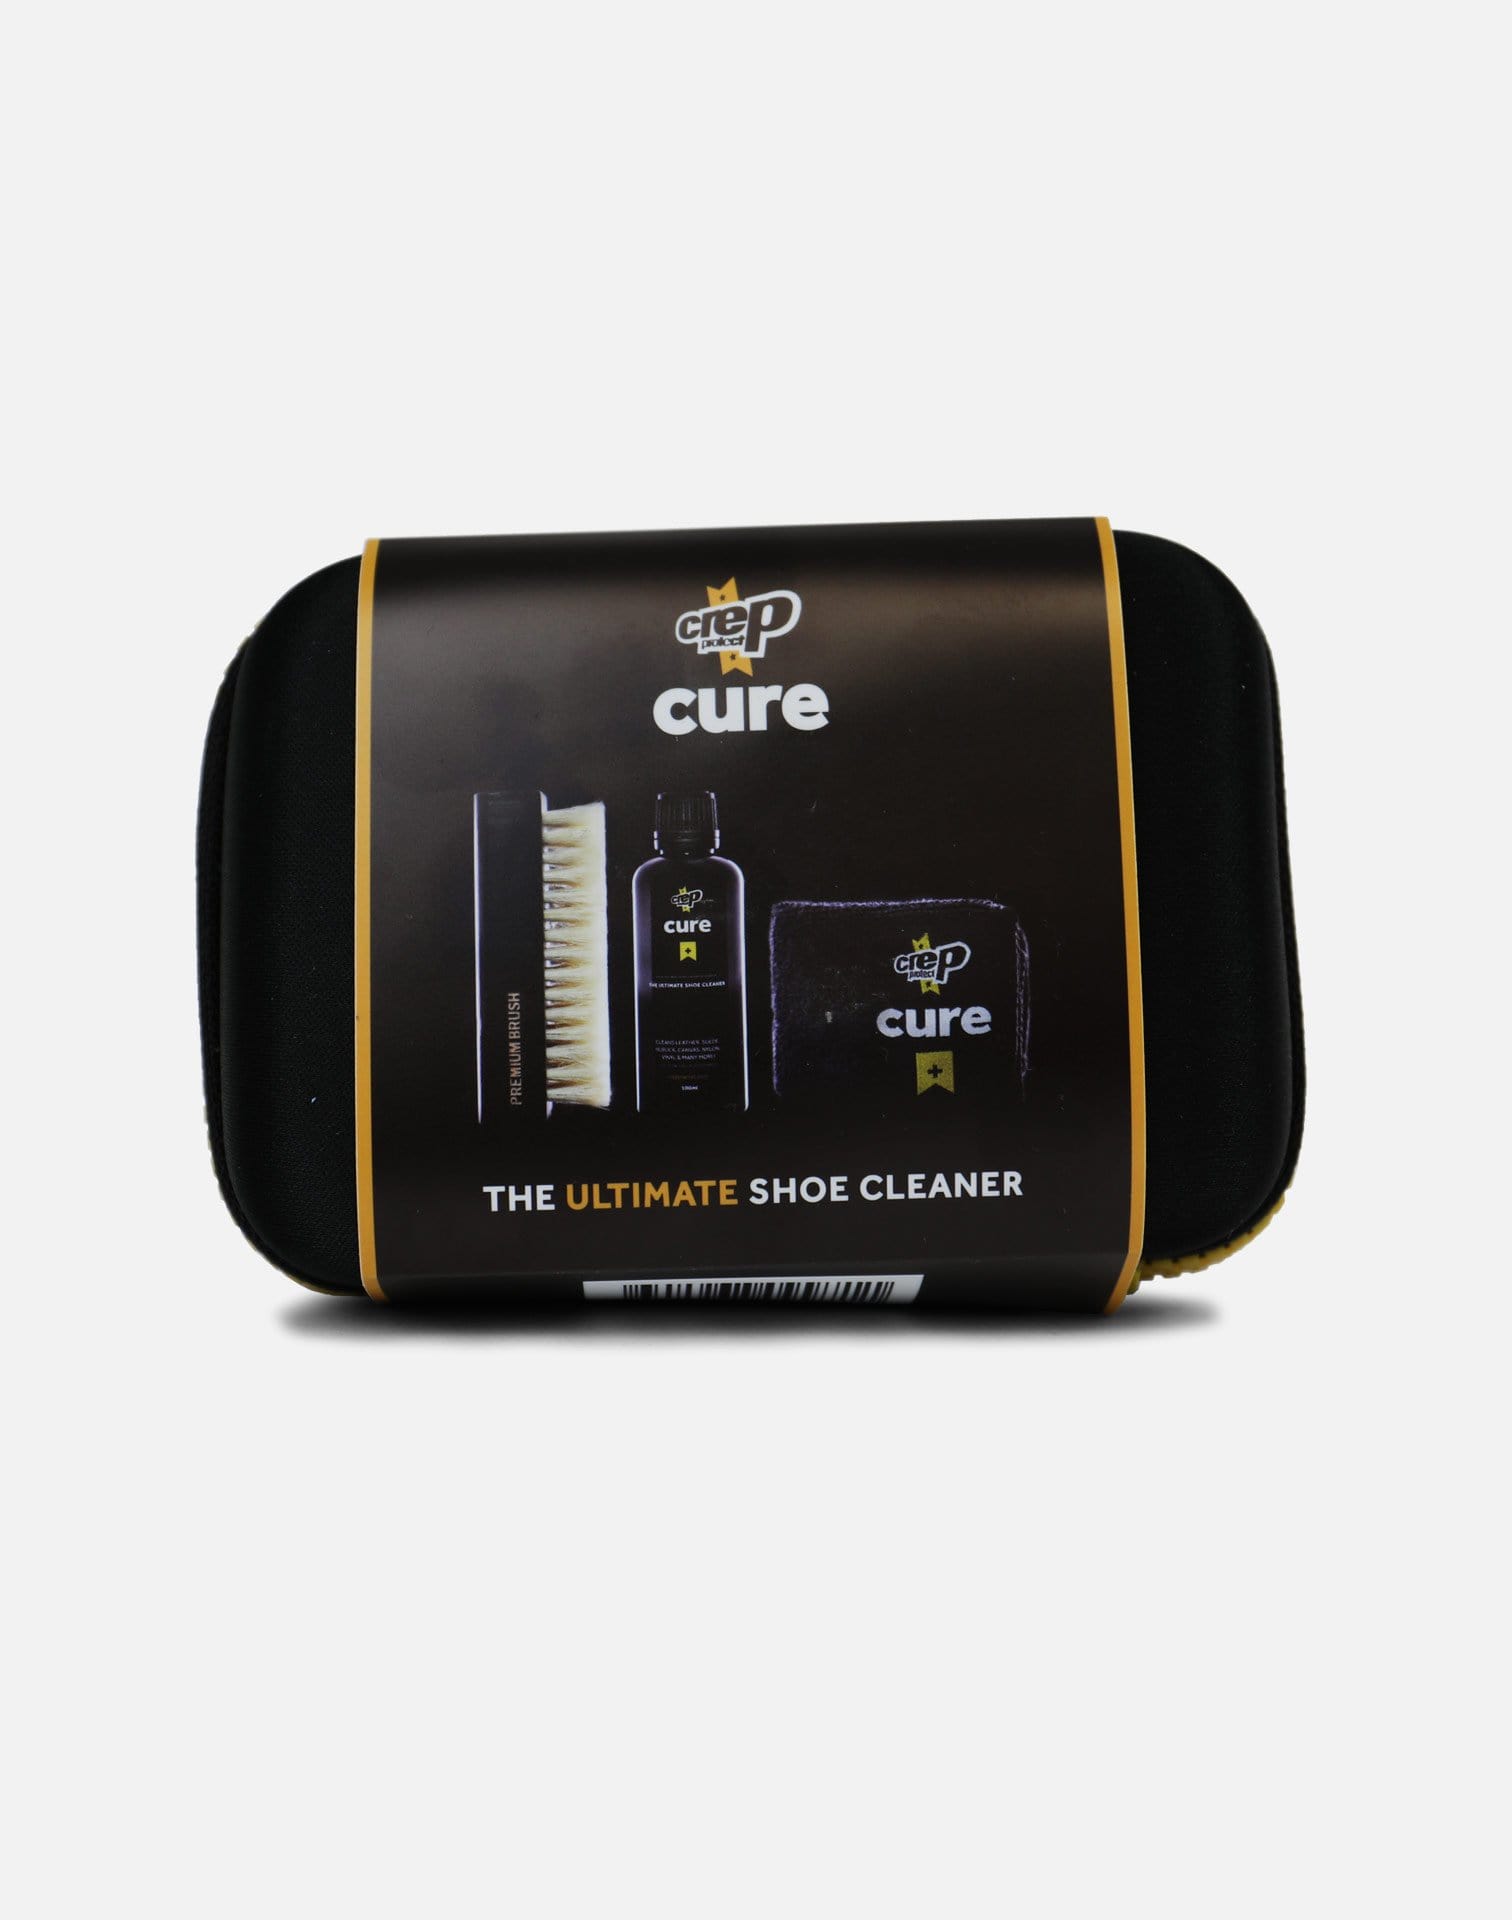 Crep Protect Crep Cure Travel Kit (Black)